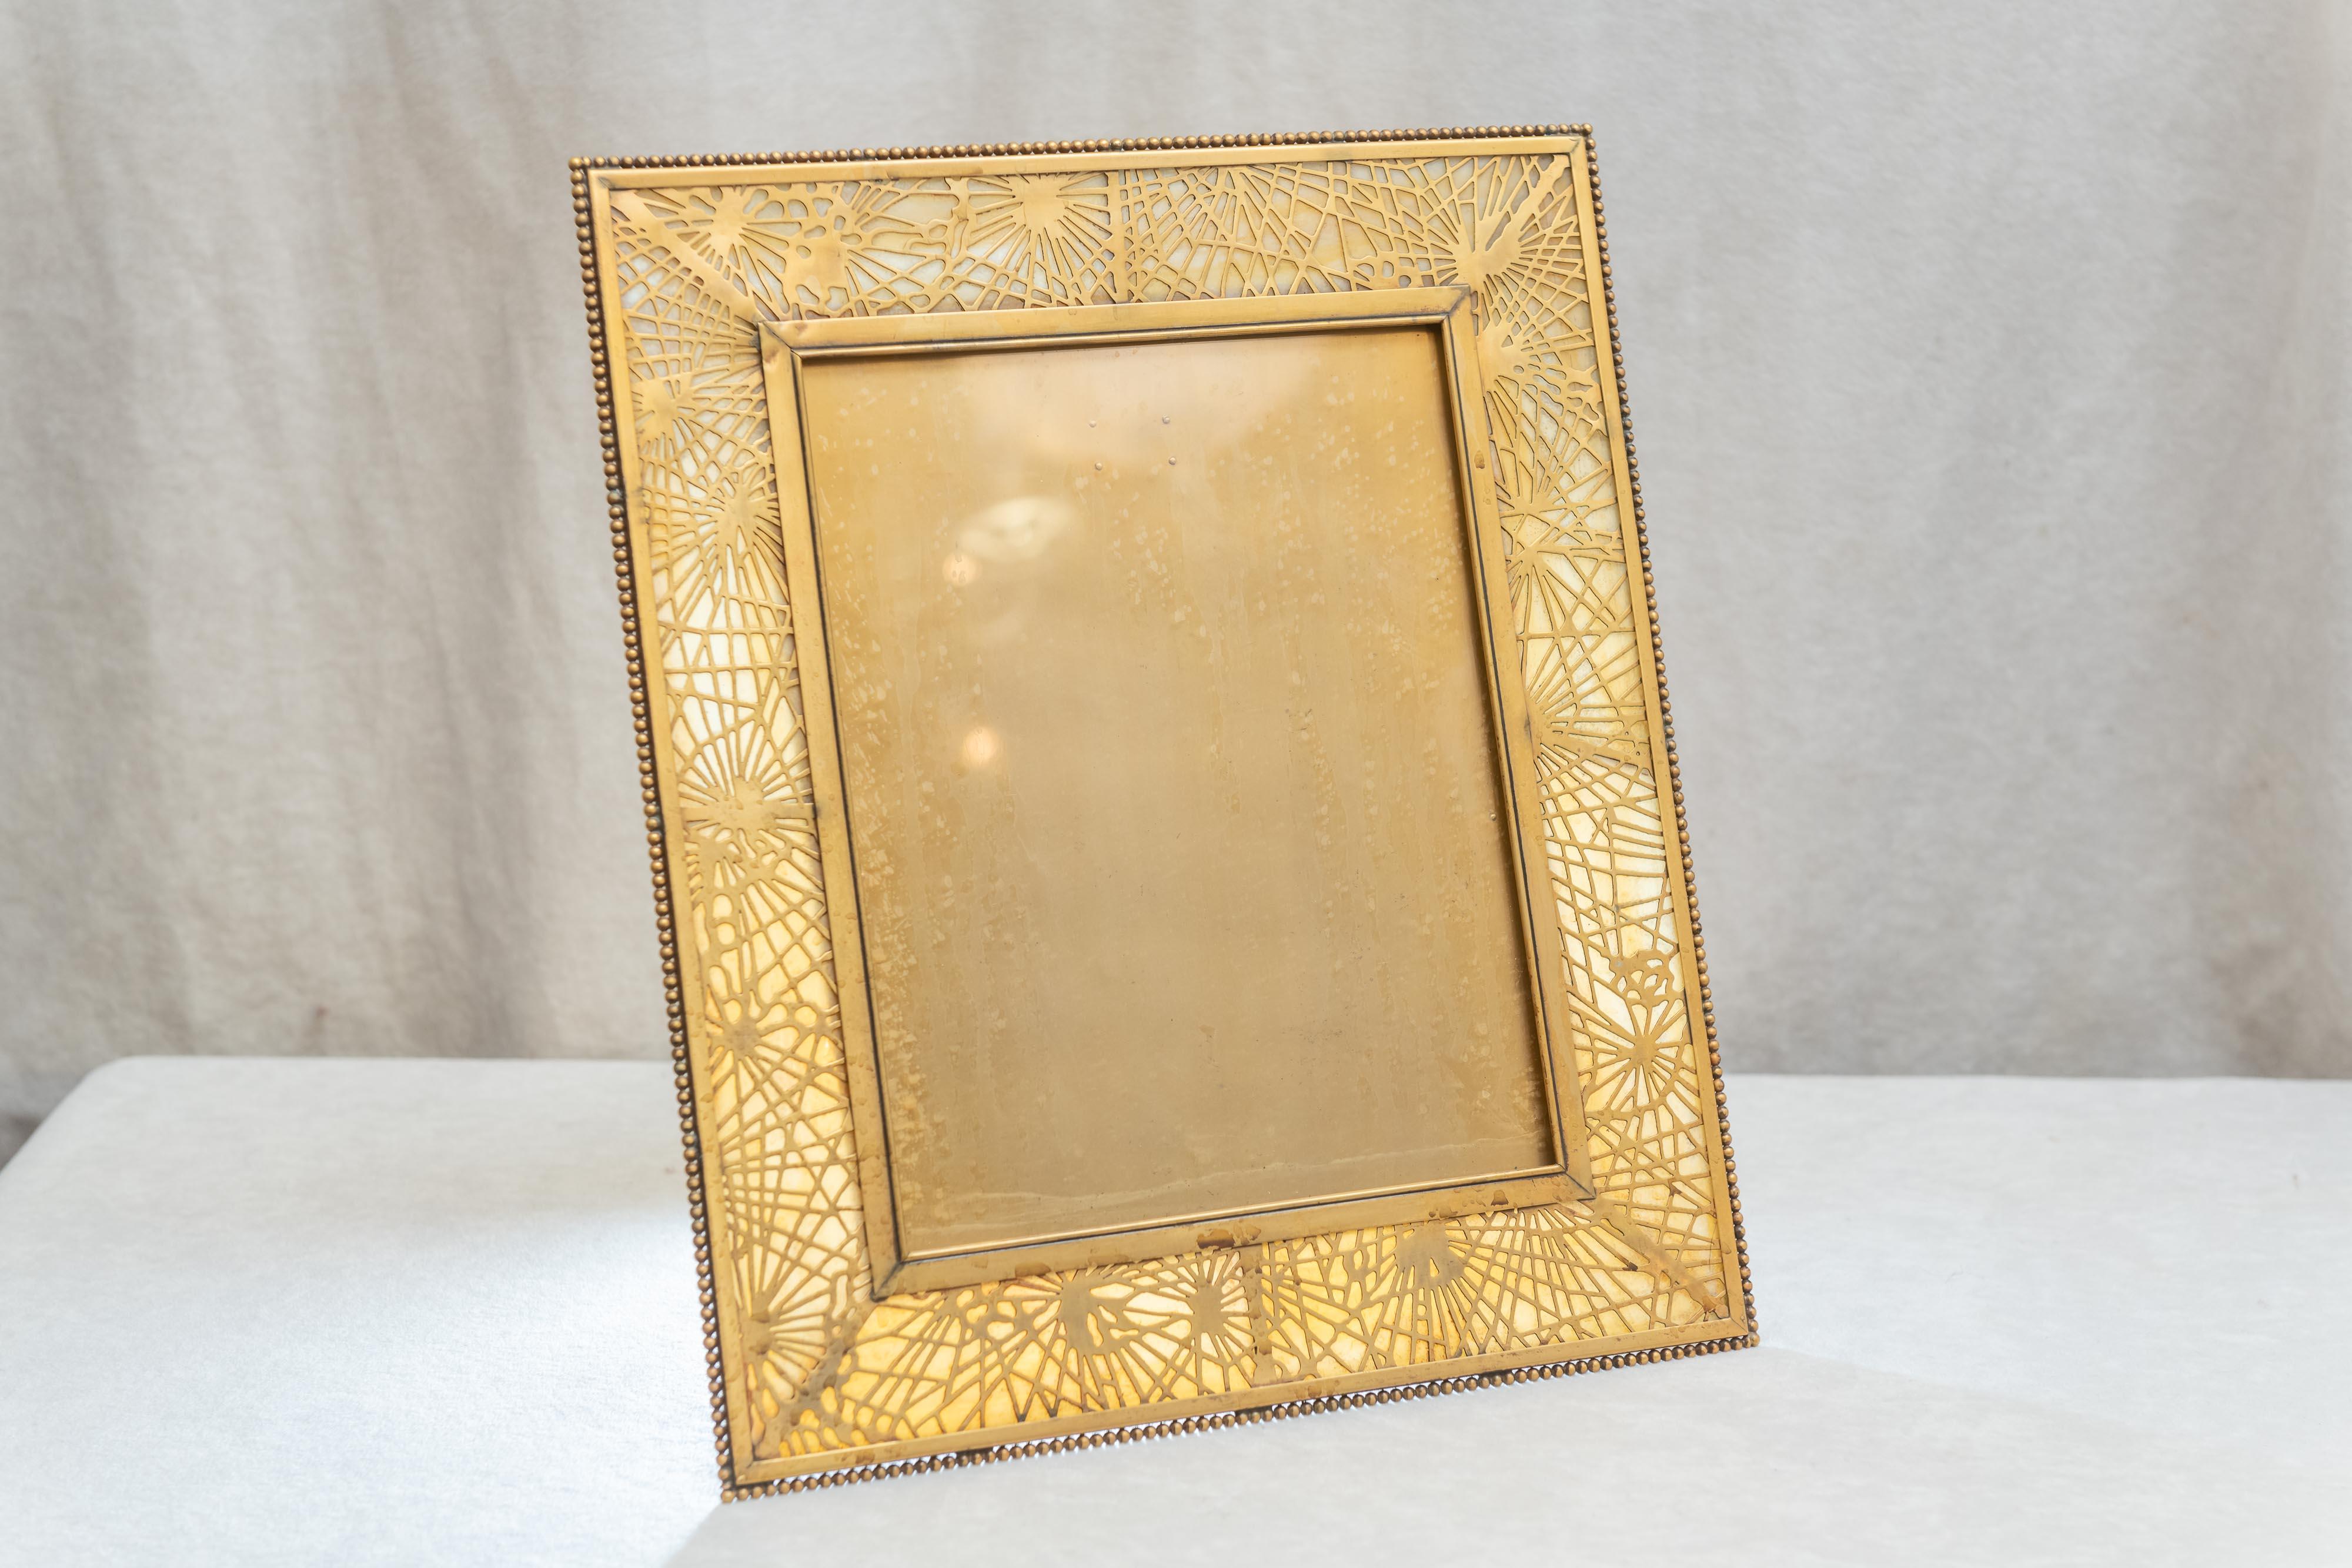 Early 20th Century Very Large Tiffany Studios Pine Needle Picture Frame in Gilt Metal and Glass